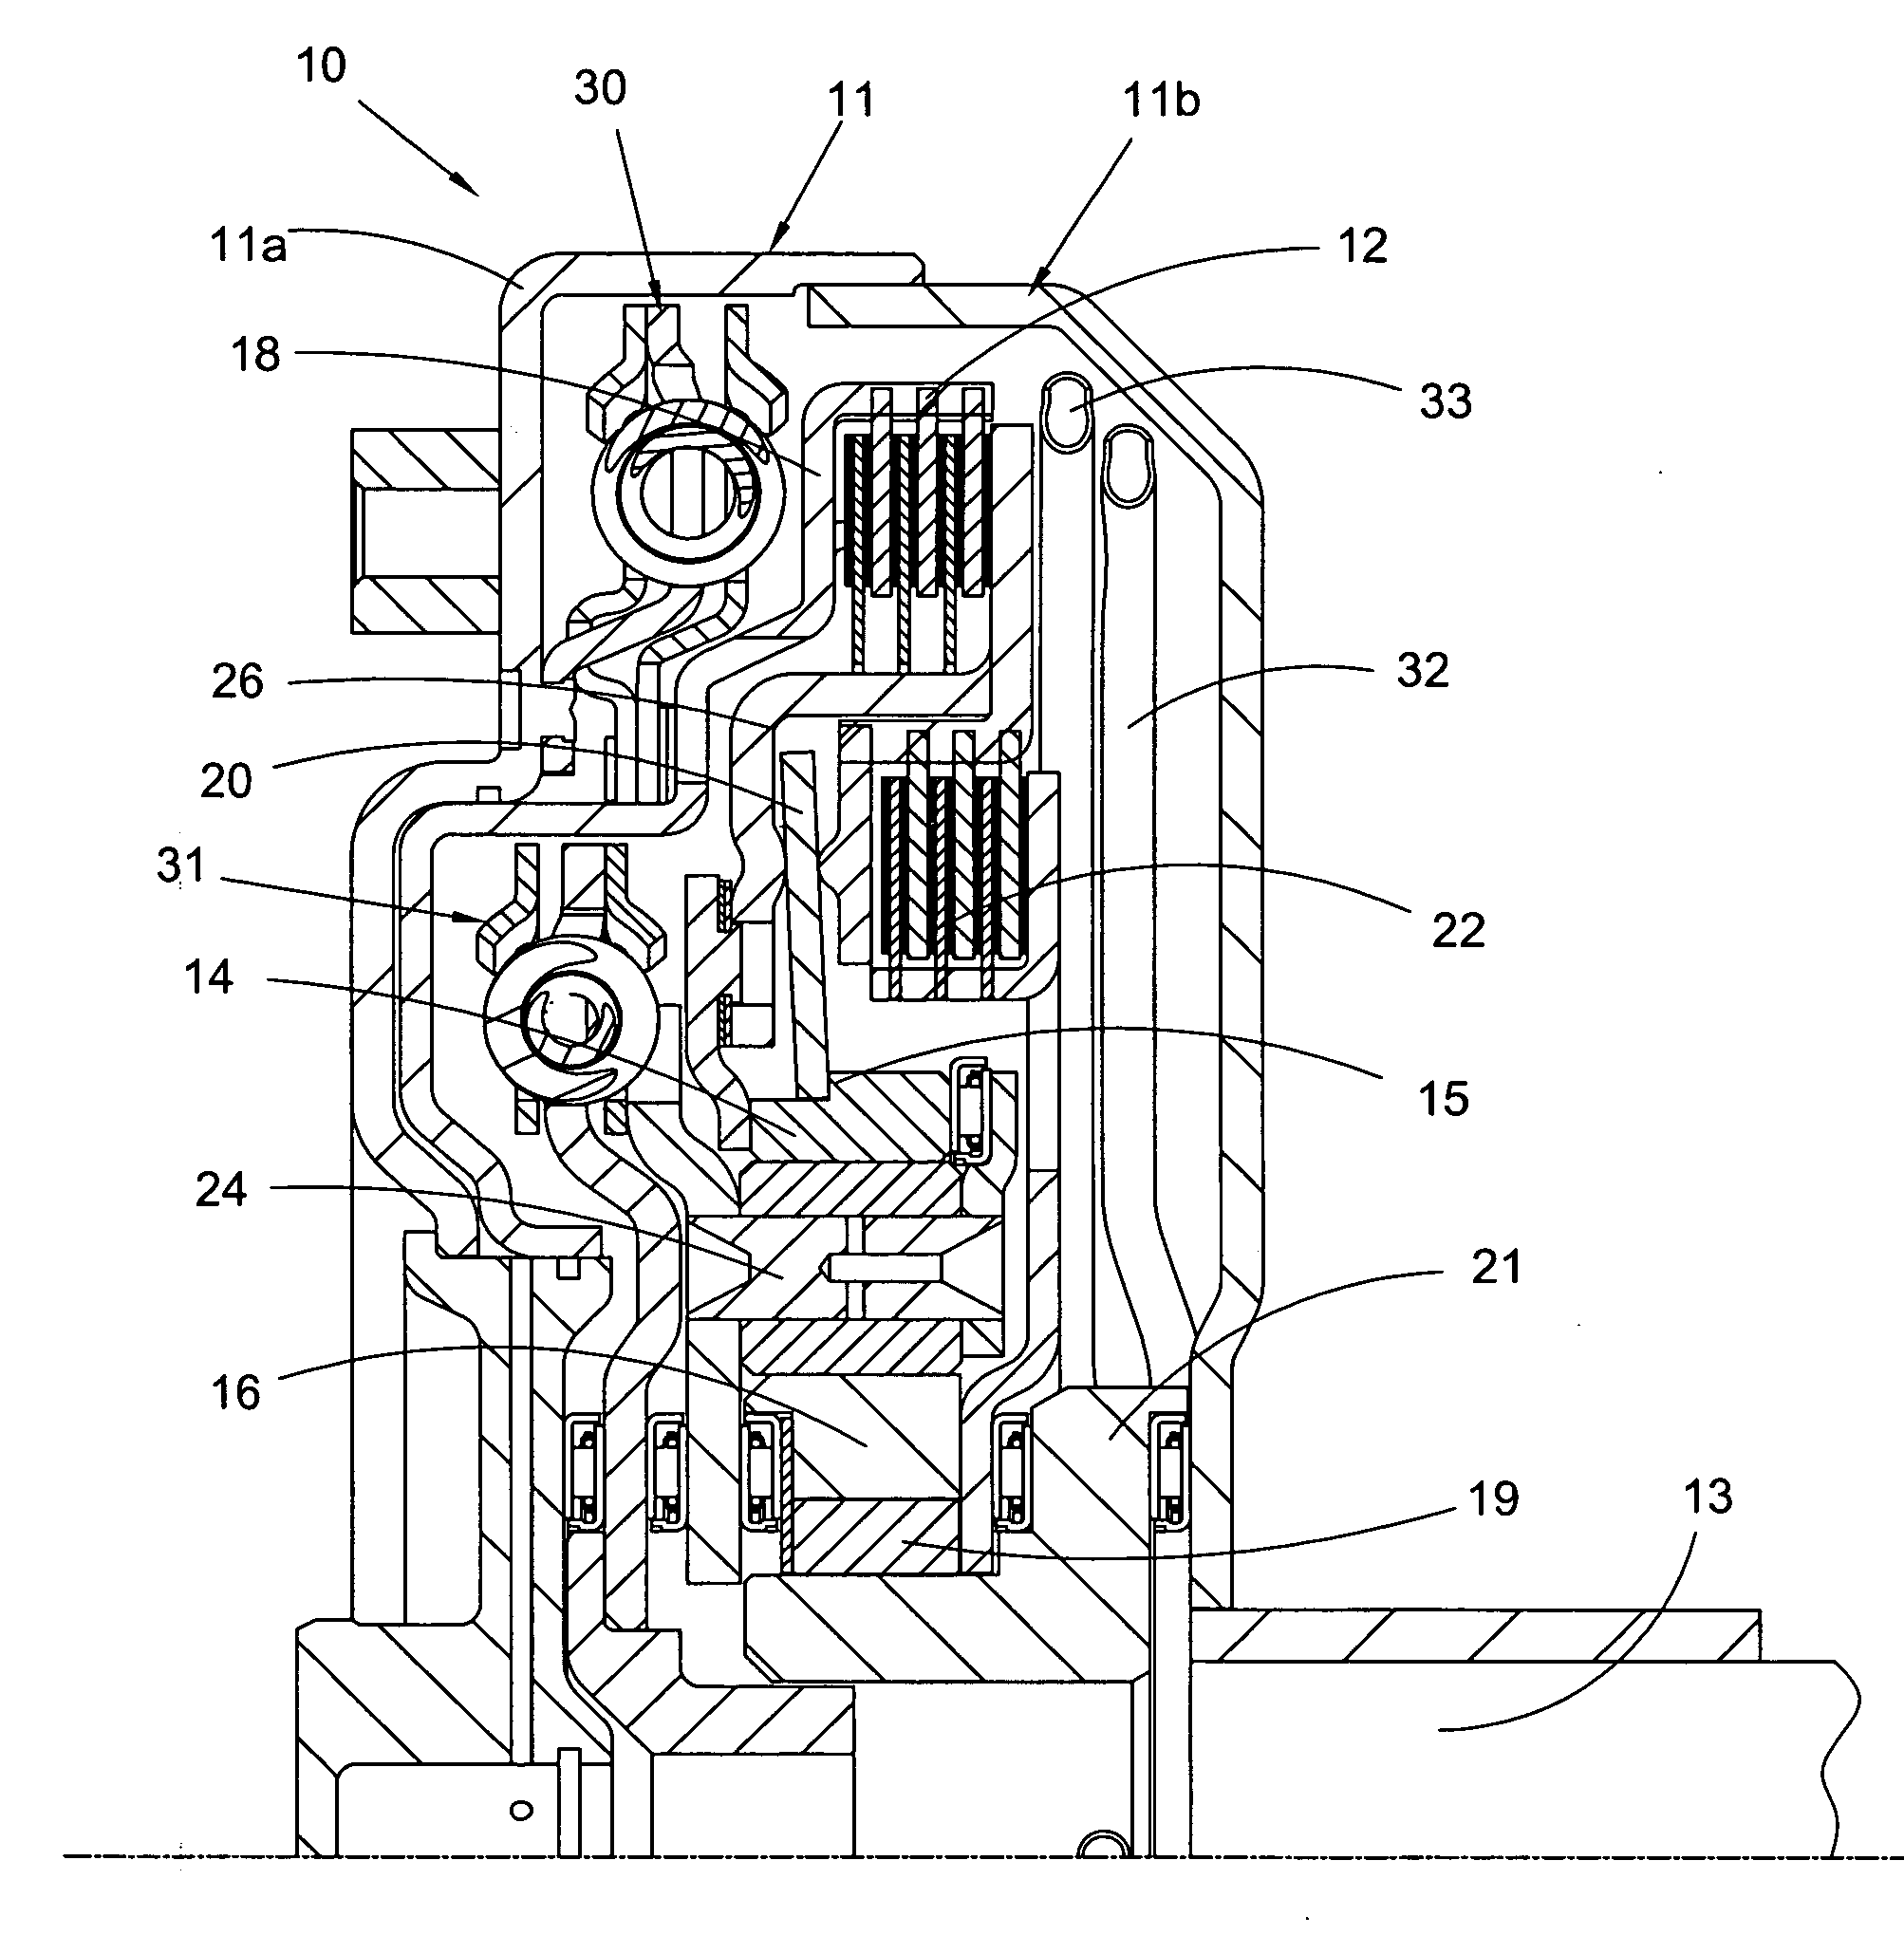 Geared torque converter with multi-plate clutches and planetary gearset